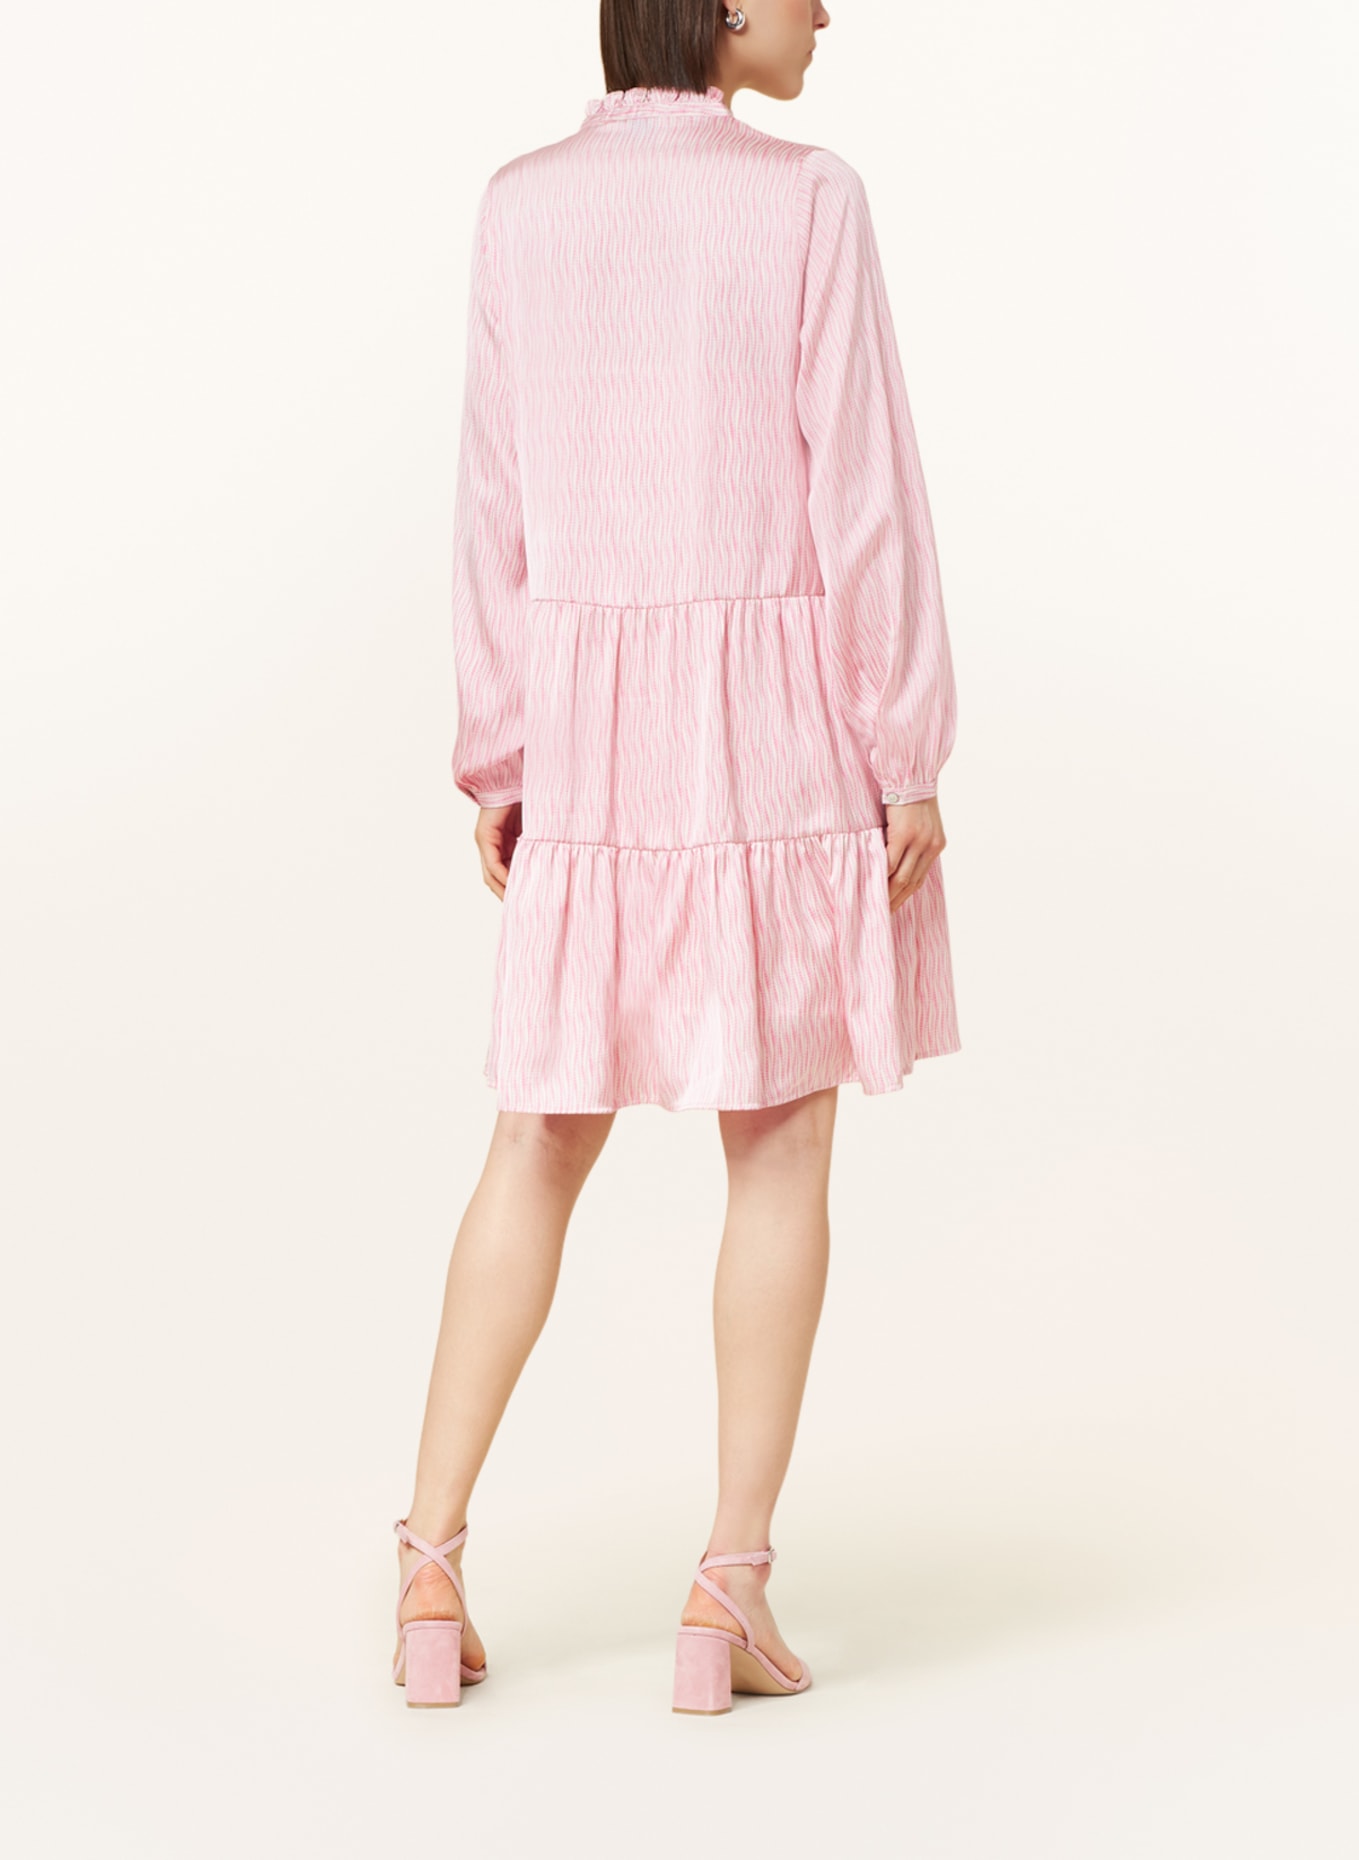 NEO NOIR Dress FEDERICA with ruffles, Color: PINK/ PINK/ WHITE (Image 3)